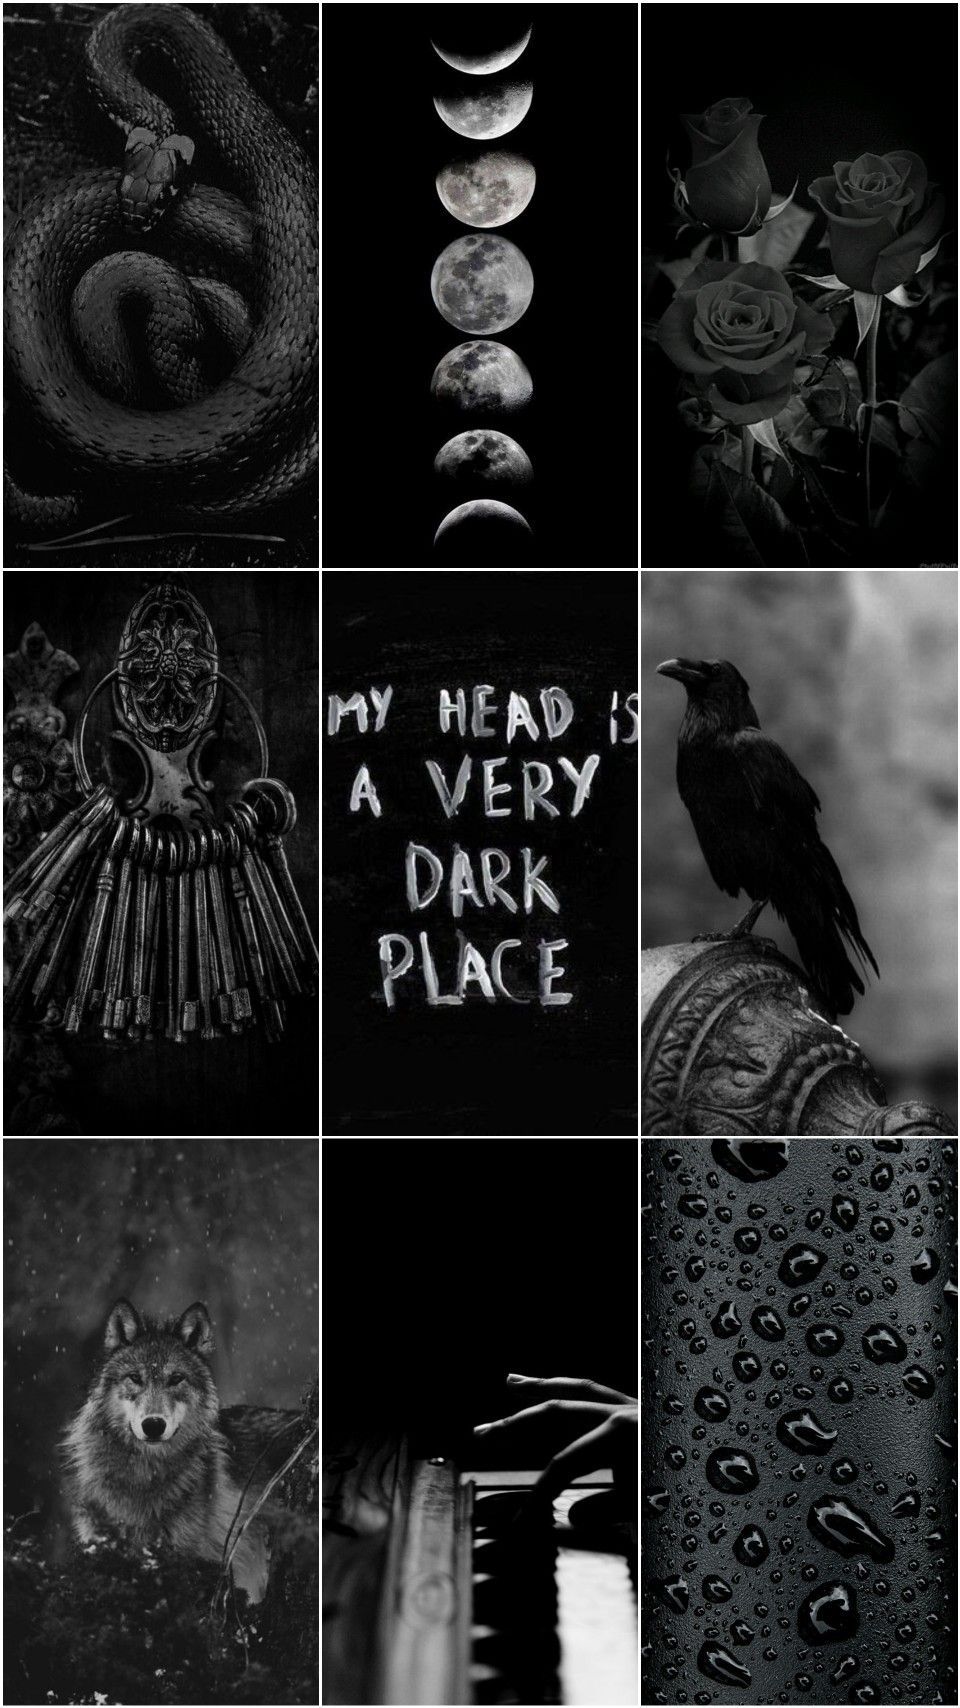 My head is a very dark place - Gothic, emo